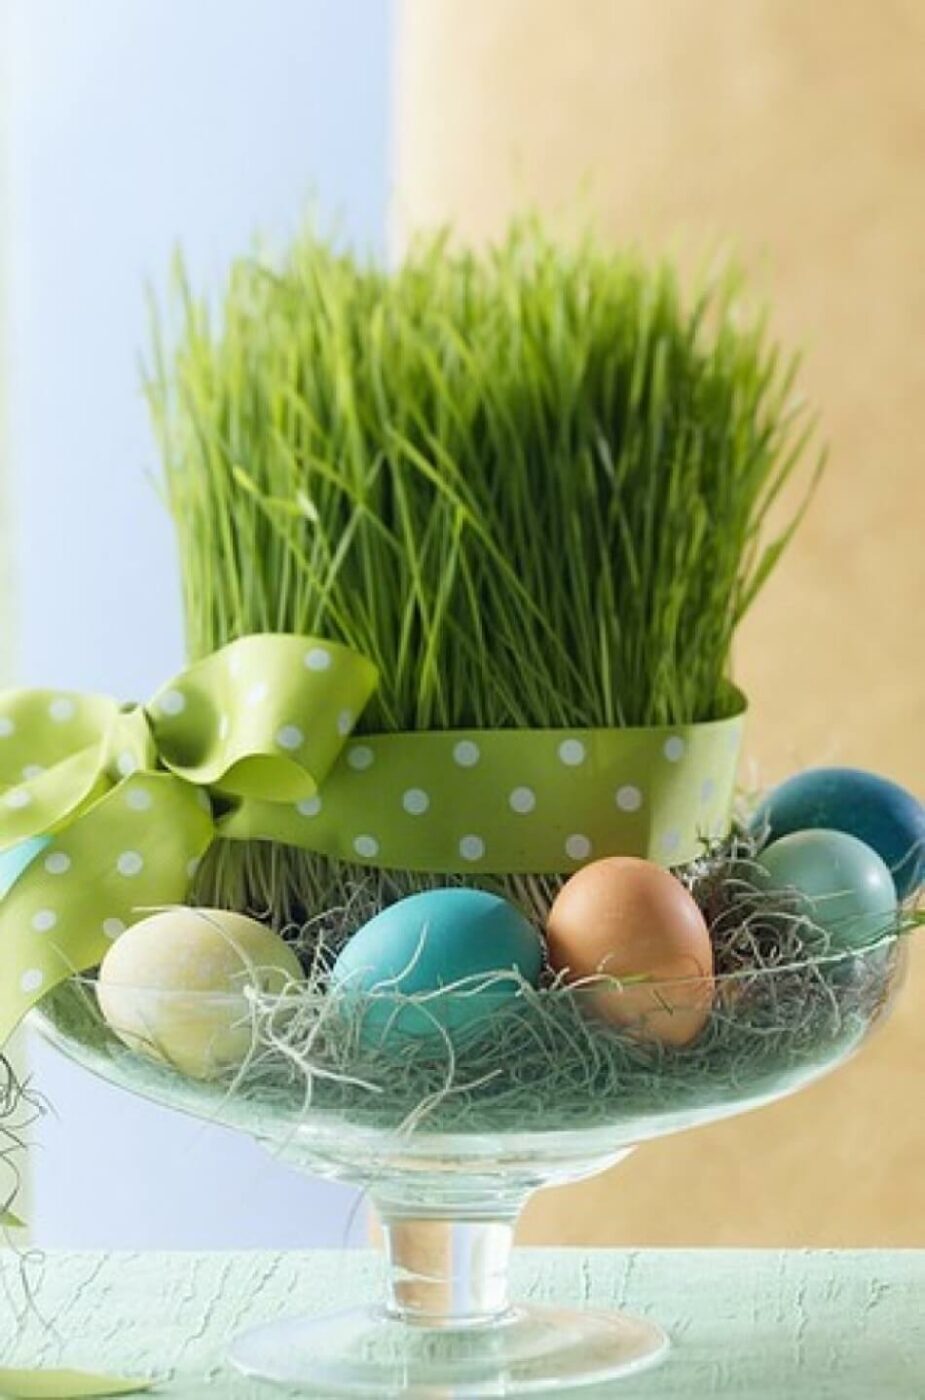 "The Grass Is Always Greener" Easter Egg Dish